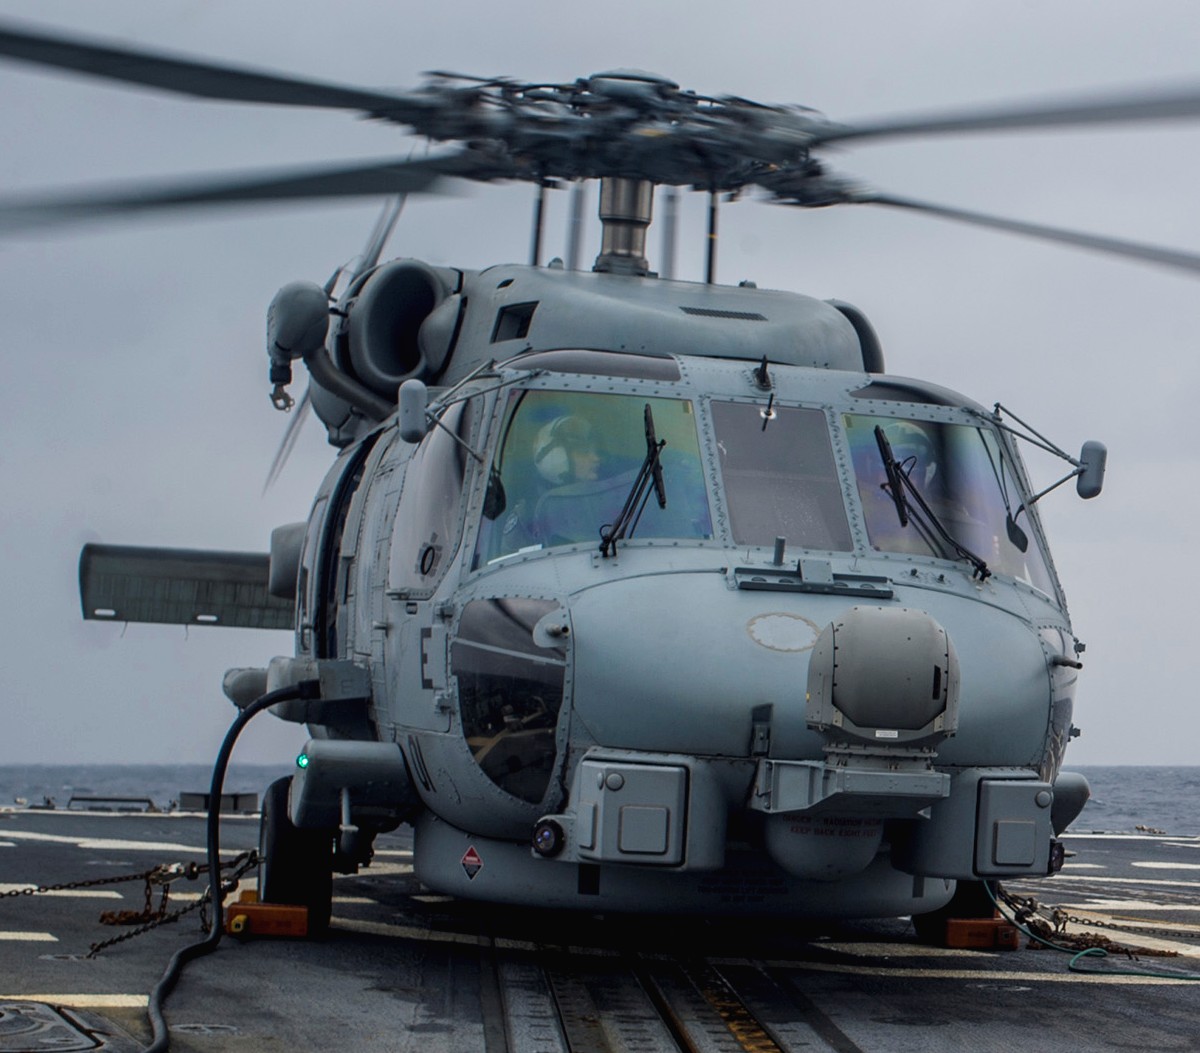 hsm-51 warlords helicopter maritime strike squadron mh-60r seahawk navy 2014 24